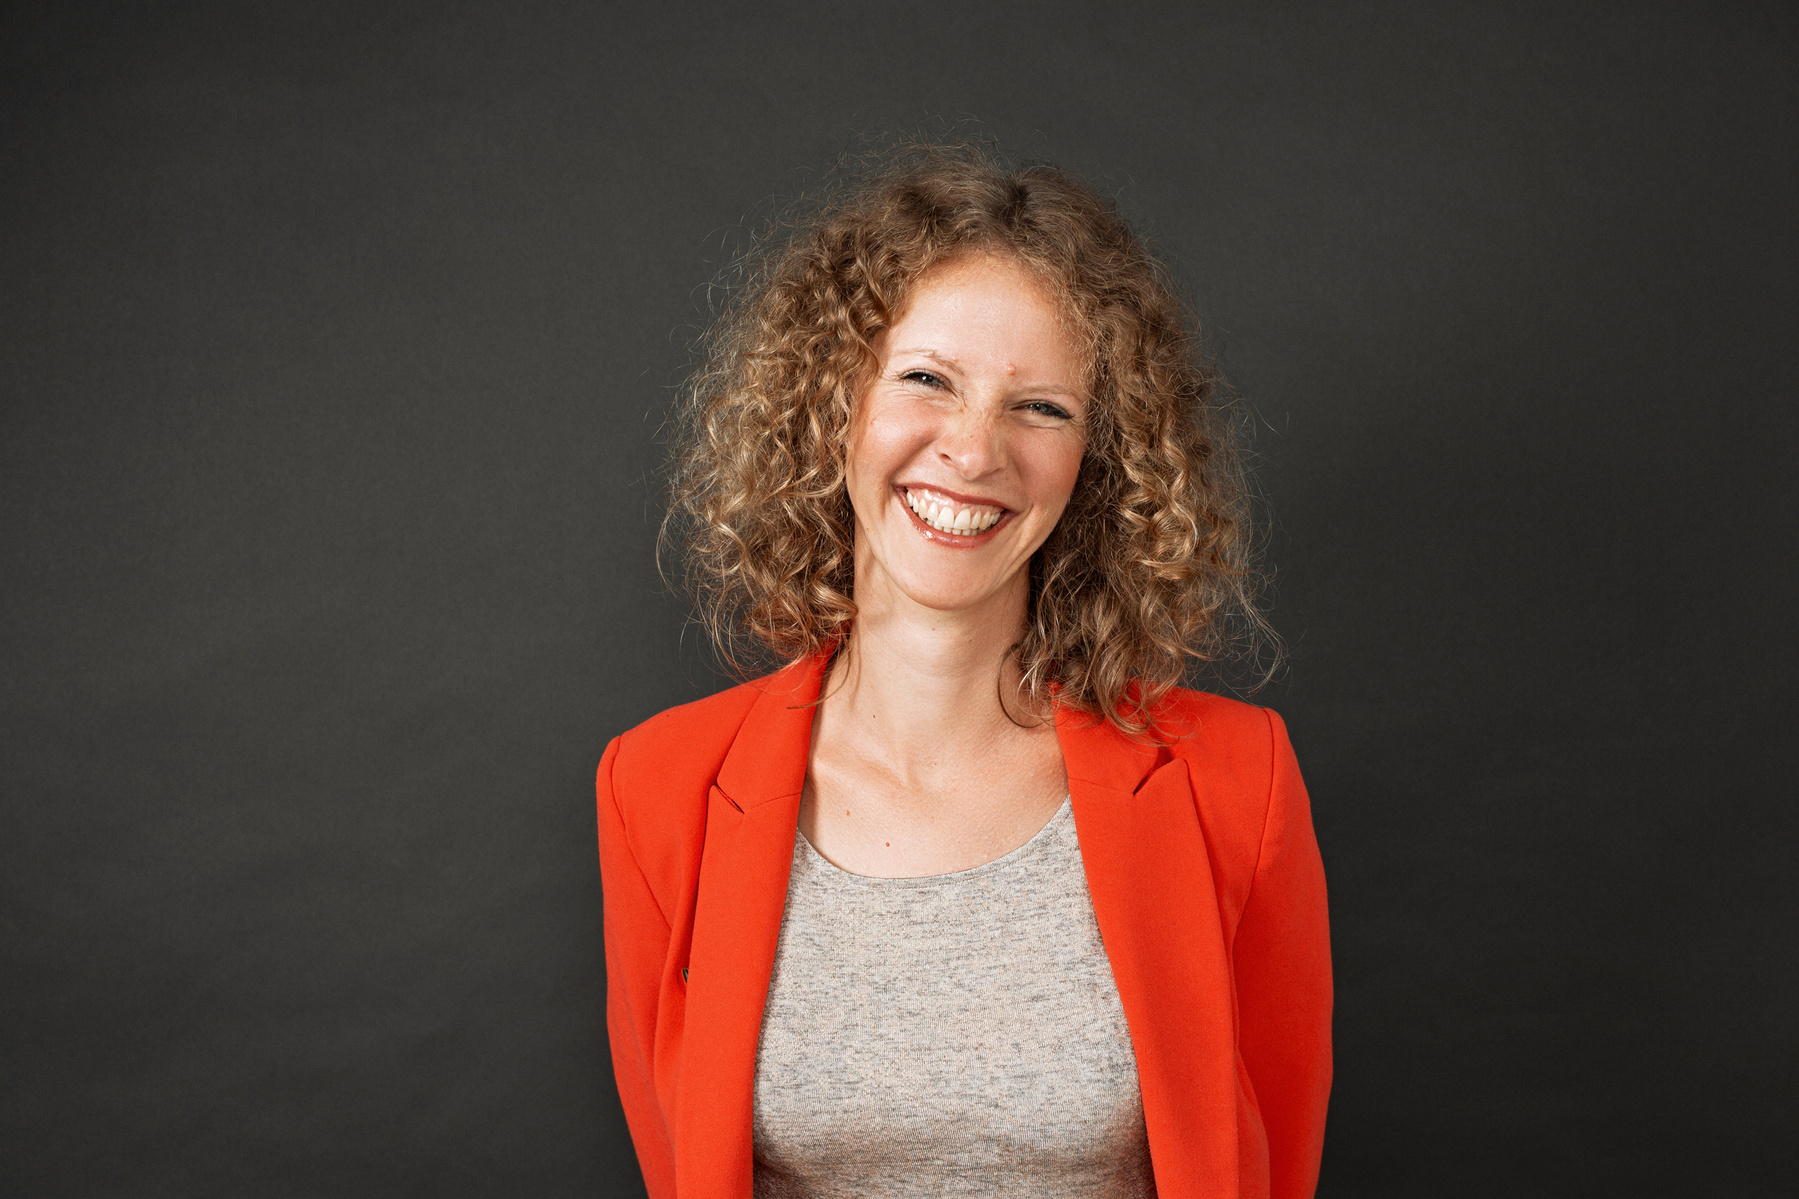 A slim woman with curly hair wears an orange blazer and smiles broadly into the camera